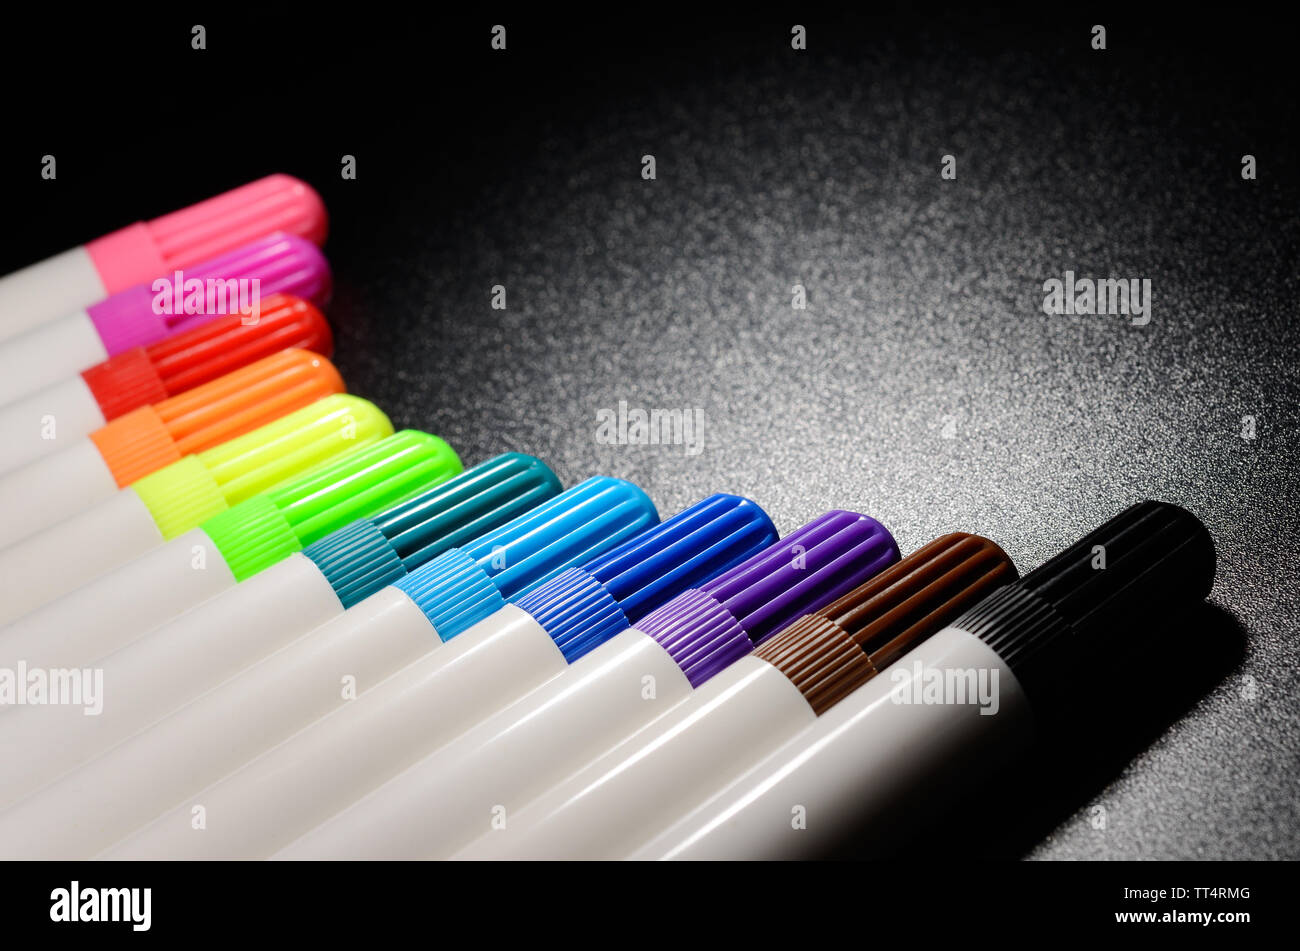 Colored felt pens on a black grained surface of the table Stock Photo